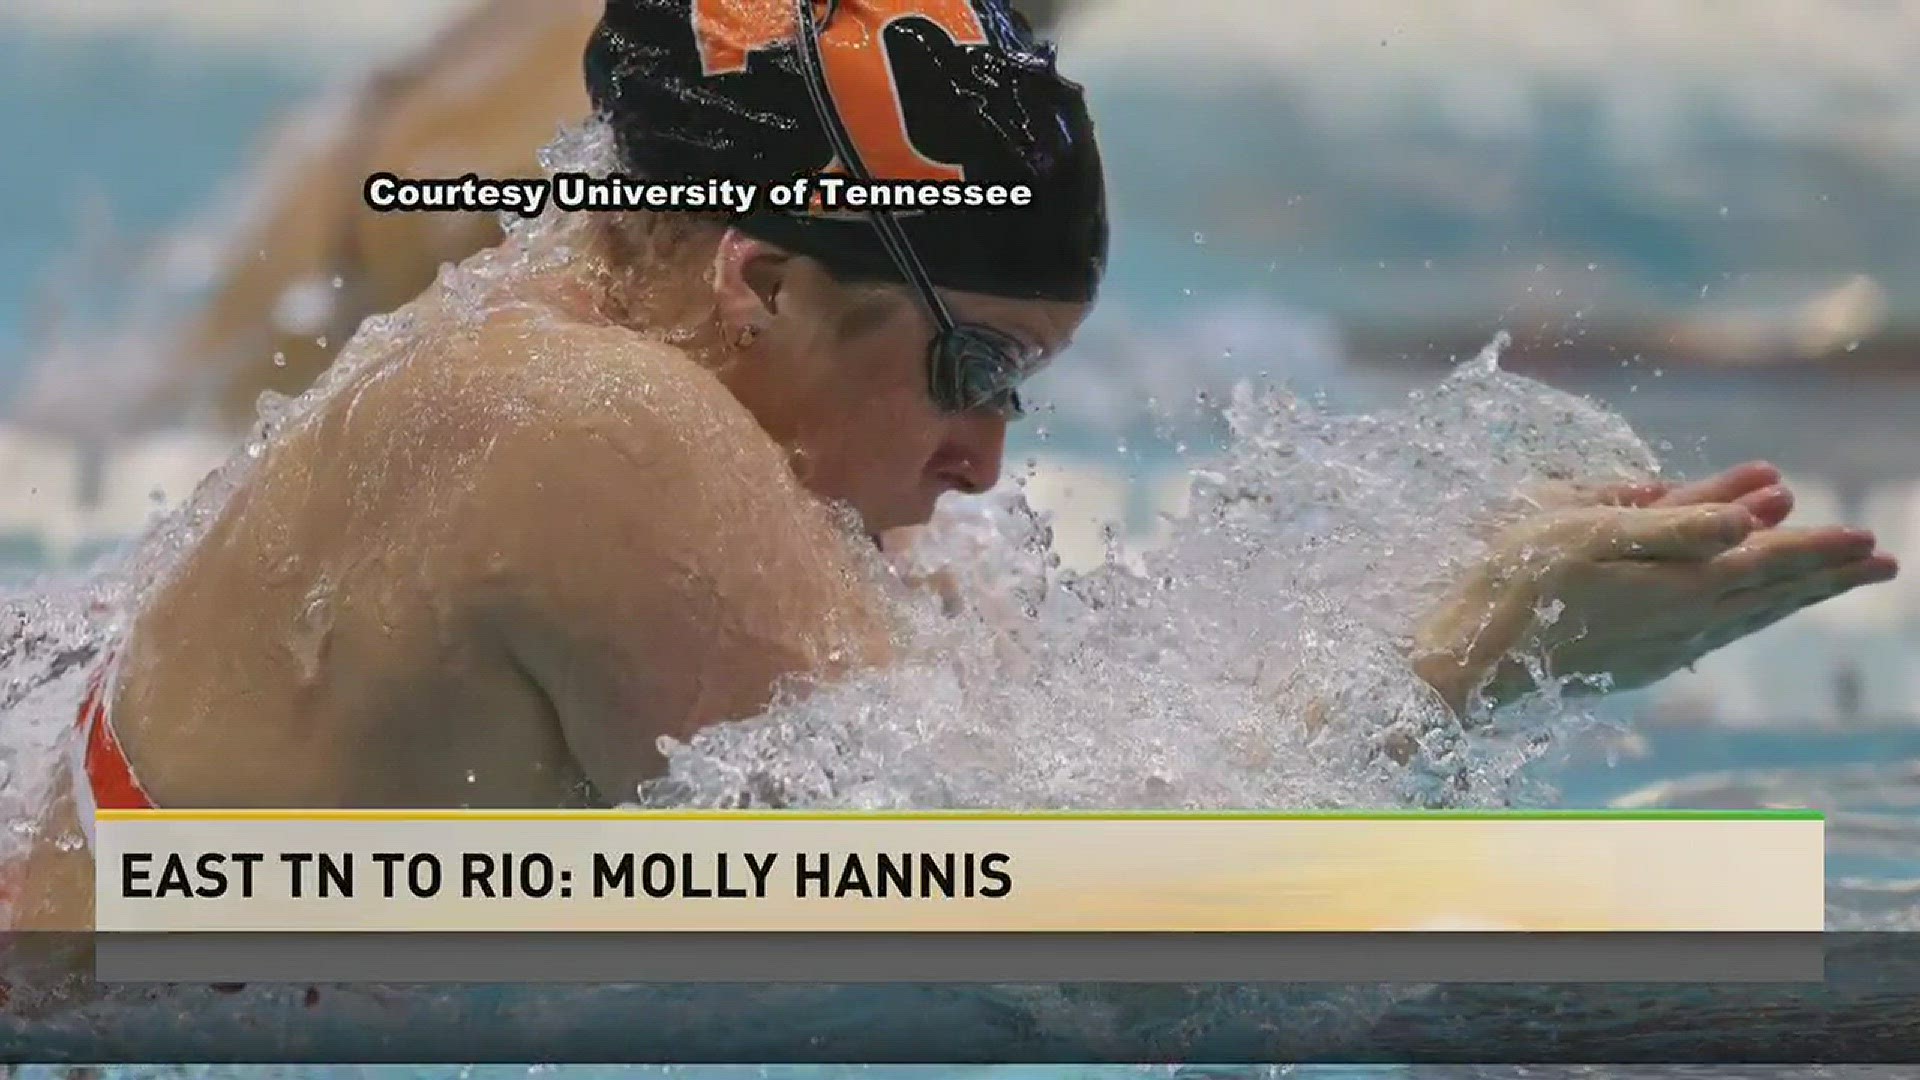 Molly Hannis was named an All-American all four years while at the University of Tennessee.